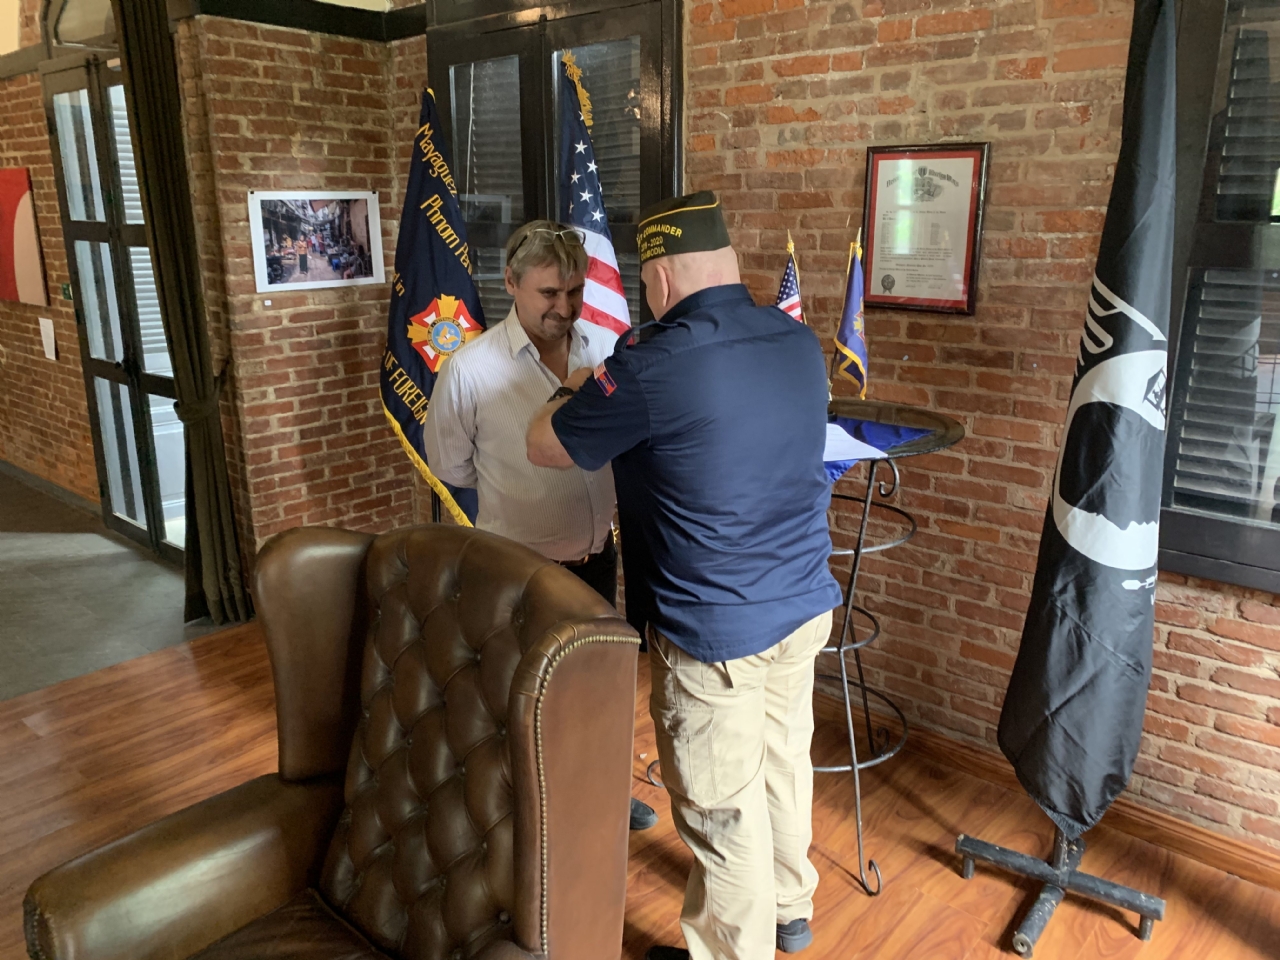 The installation of our newest Post member, Gary Kidd, on August 8th, 2020